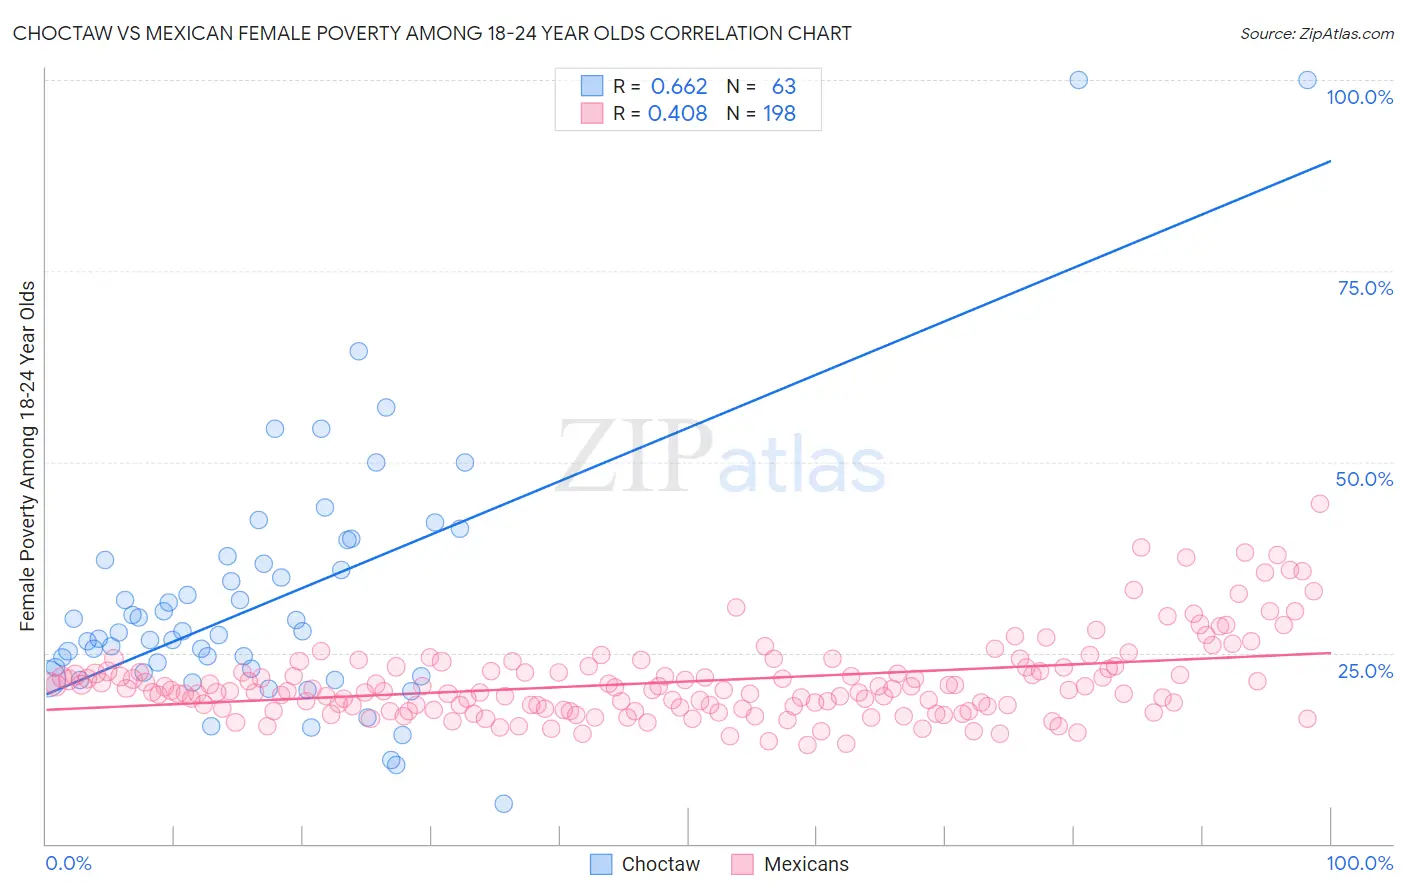 Choctaw vs Mexican Female Poverty Among 18-24 Year Olds